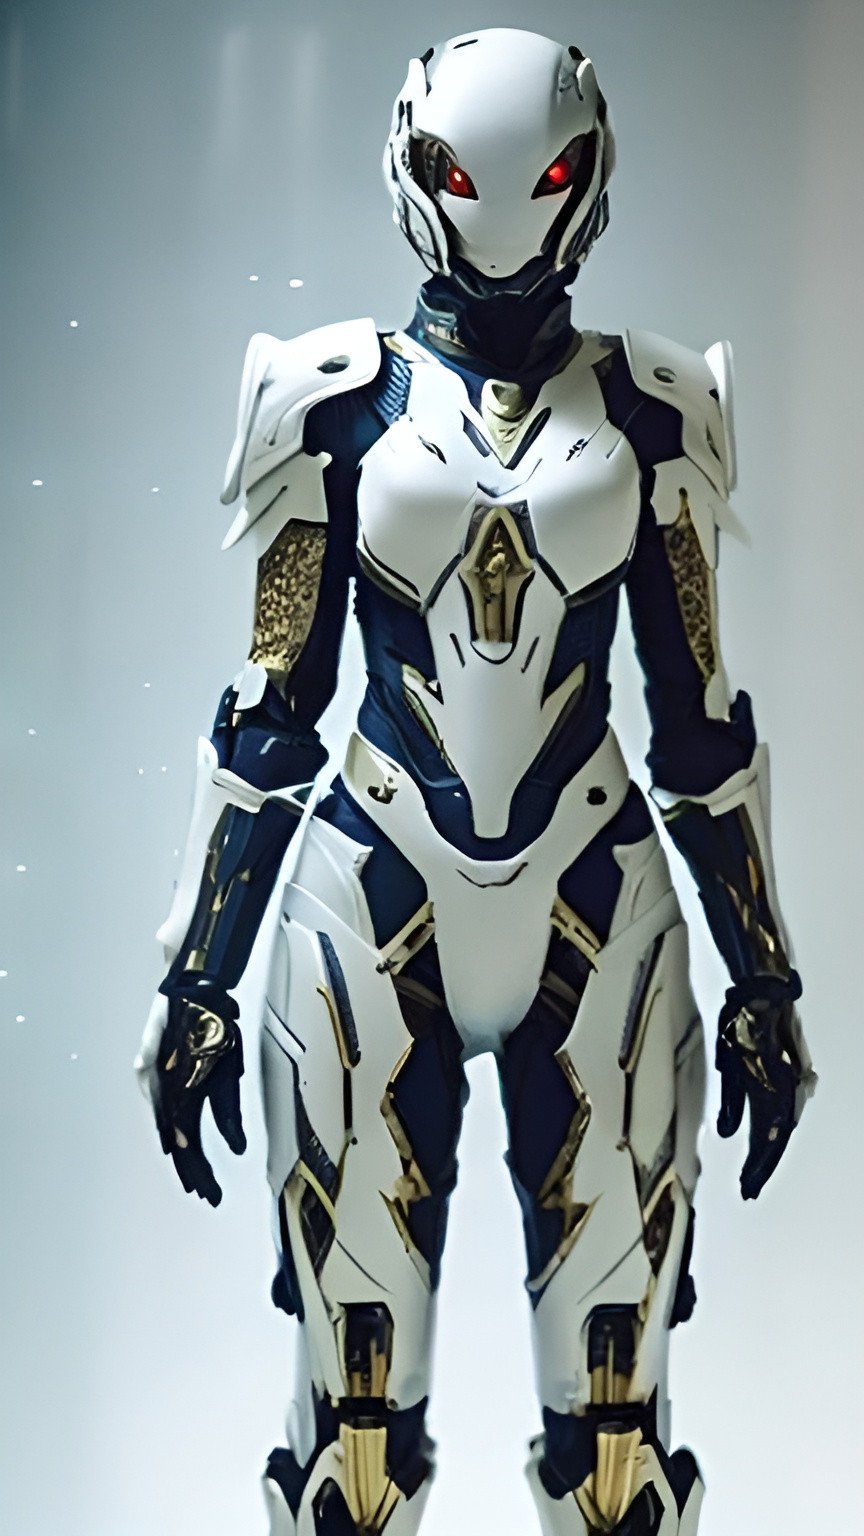 Prompt: I need a futuristic armor suit, full body, white and gold, very moody. in an underground cave